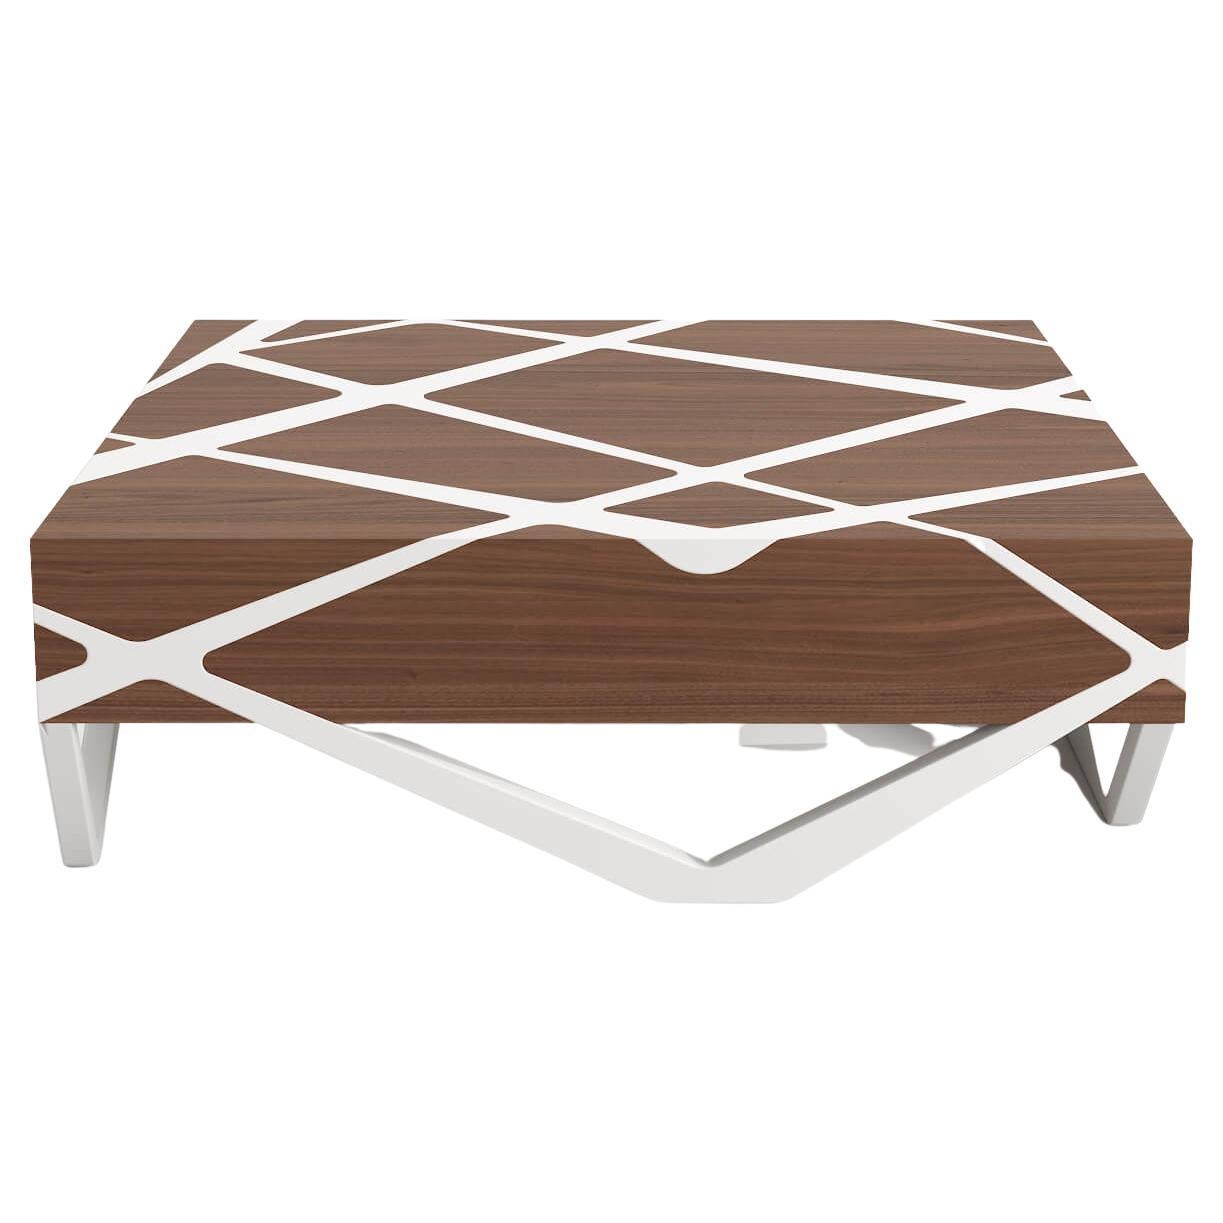 21st Century Award-Winning Center Coffee Table Roots in Walnut and White Lacquer